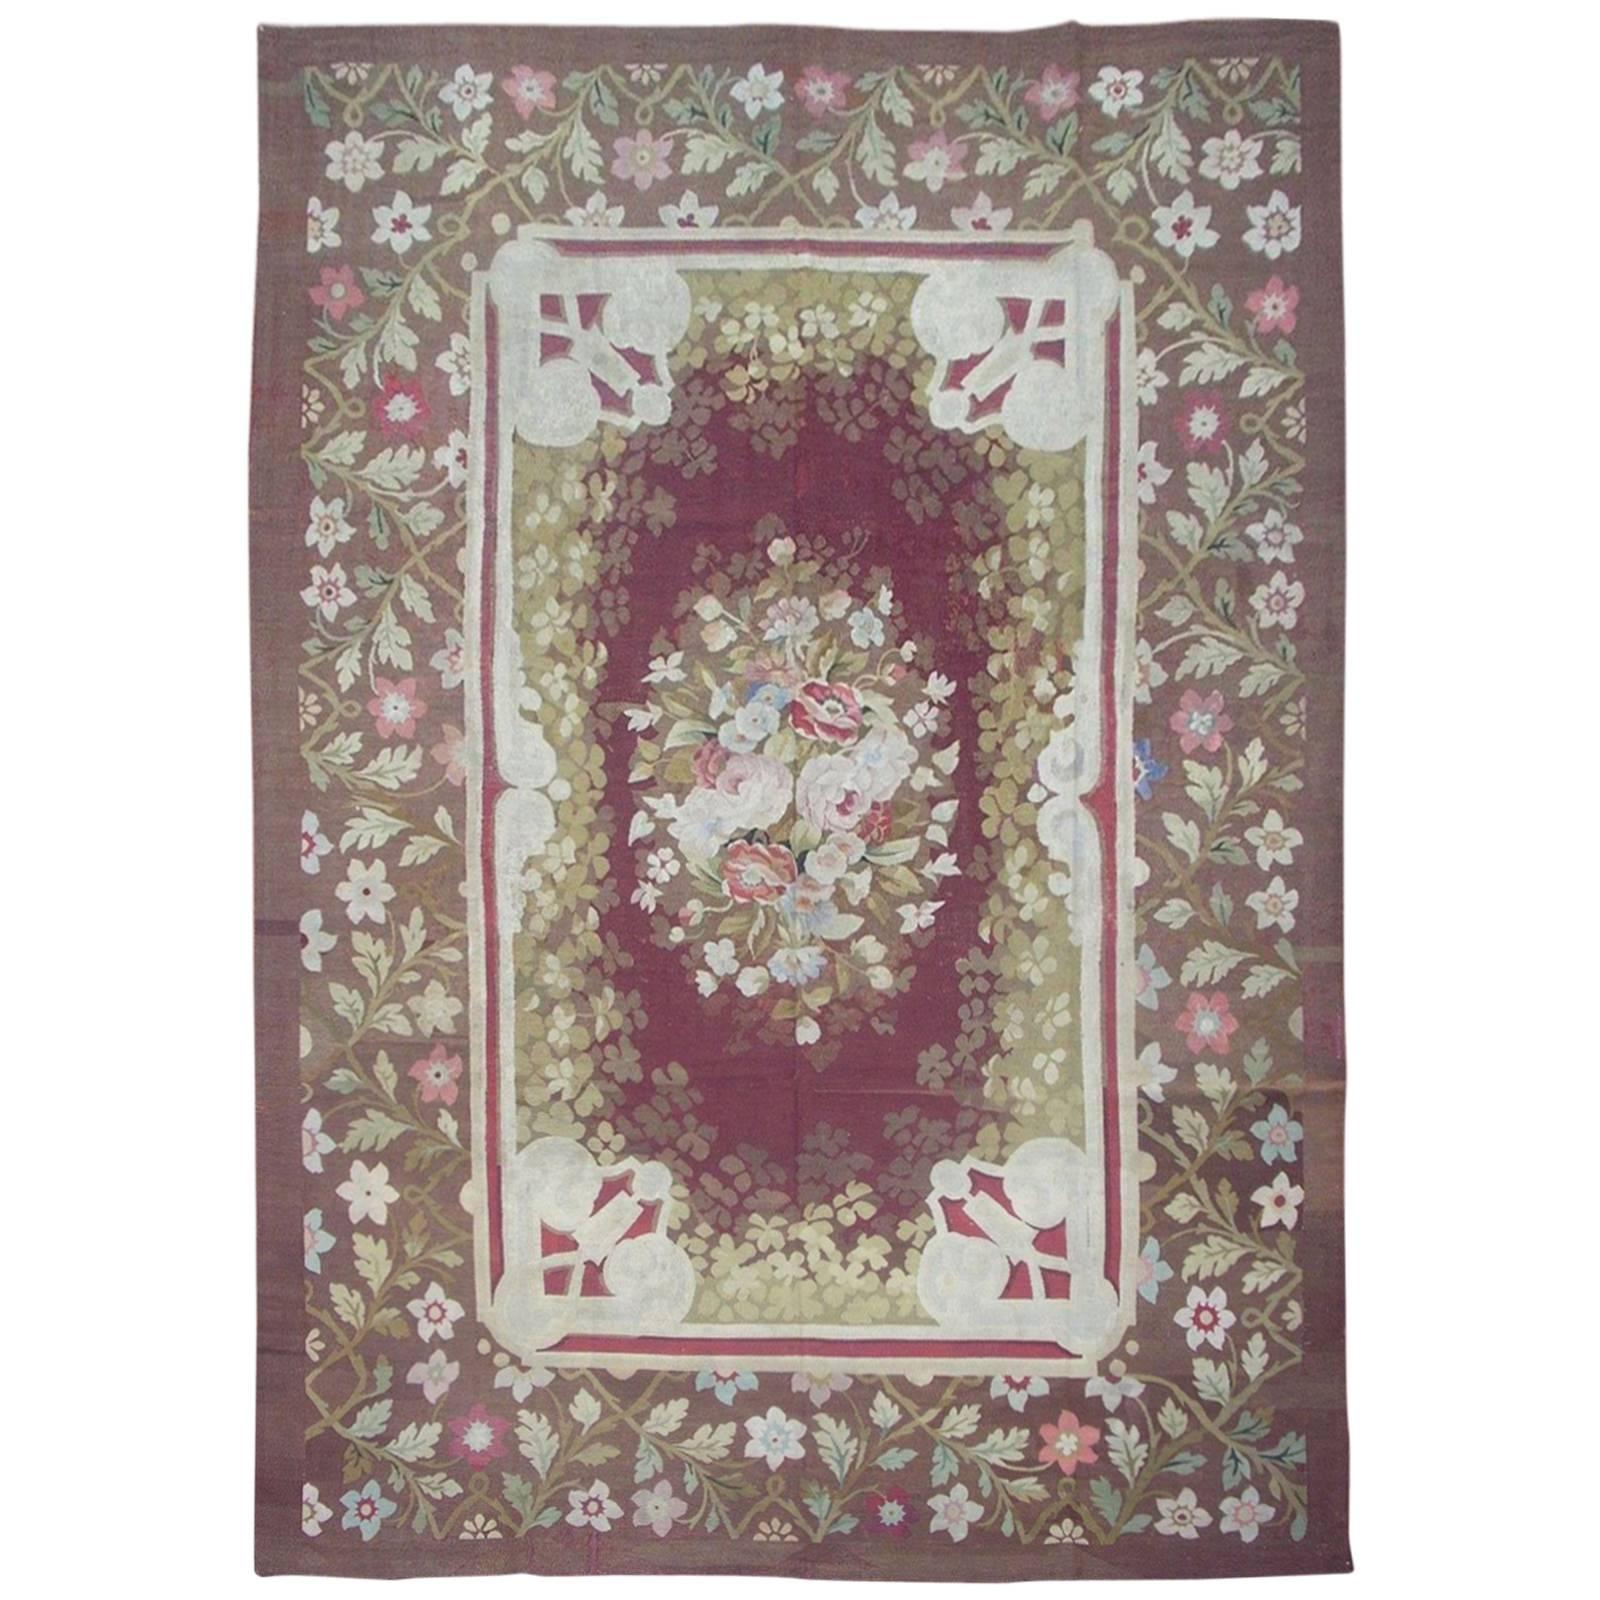 Antique French Aubusson Rug with Floral Design, circa 1880 For Sale